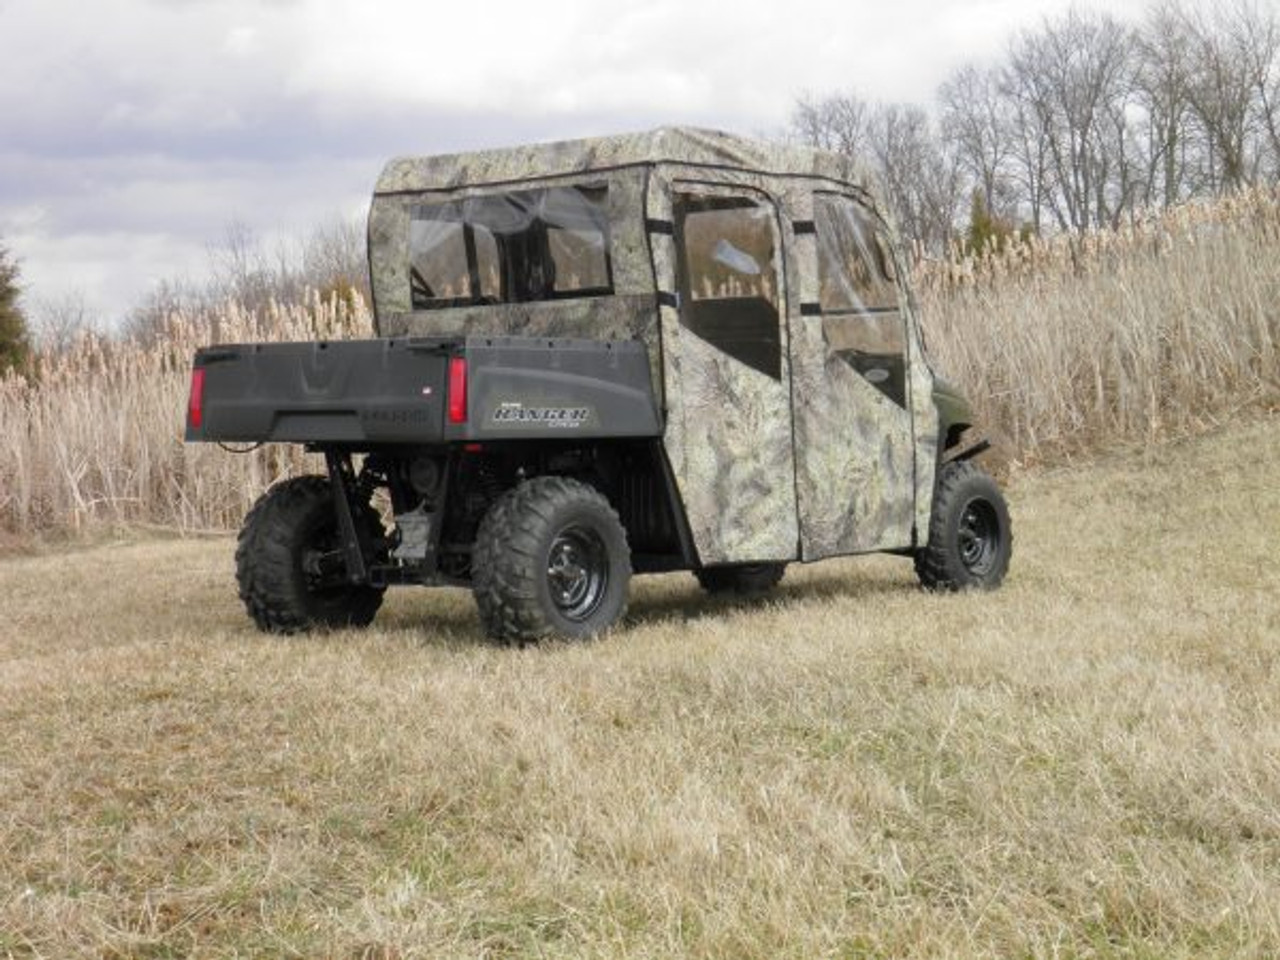 3 Star side x side Polaris Ranger Mid-Size Crew 500/570 full cab enclosure side and rear angle view